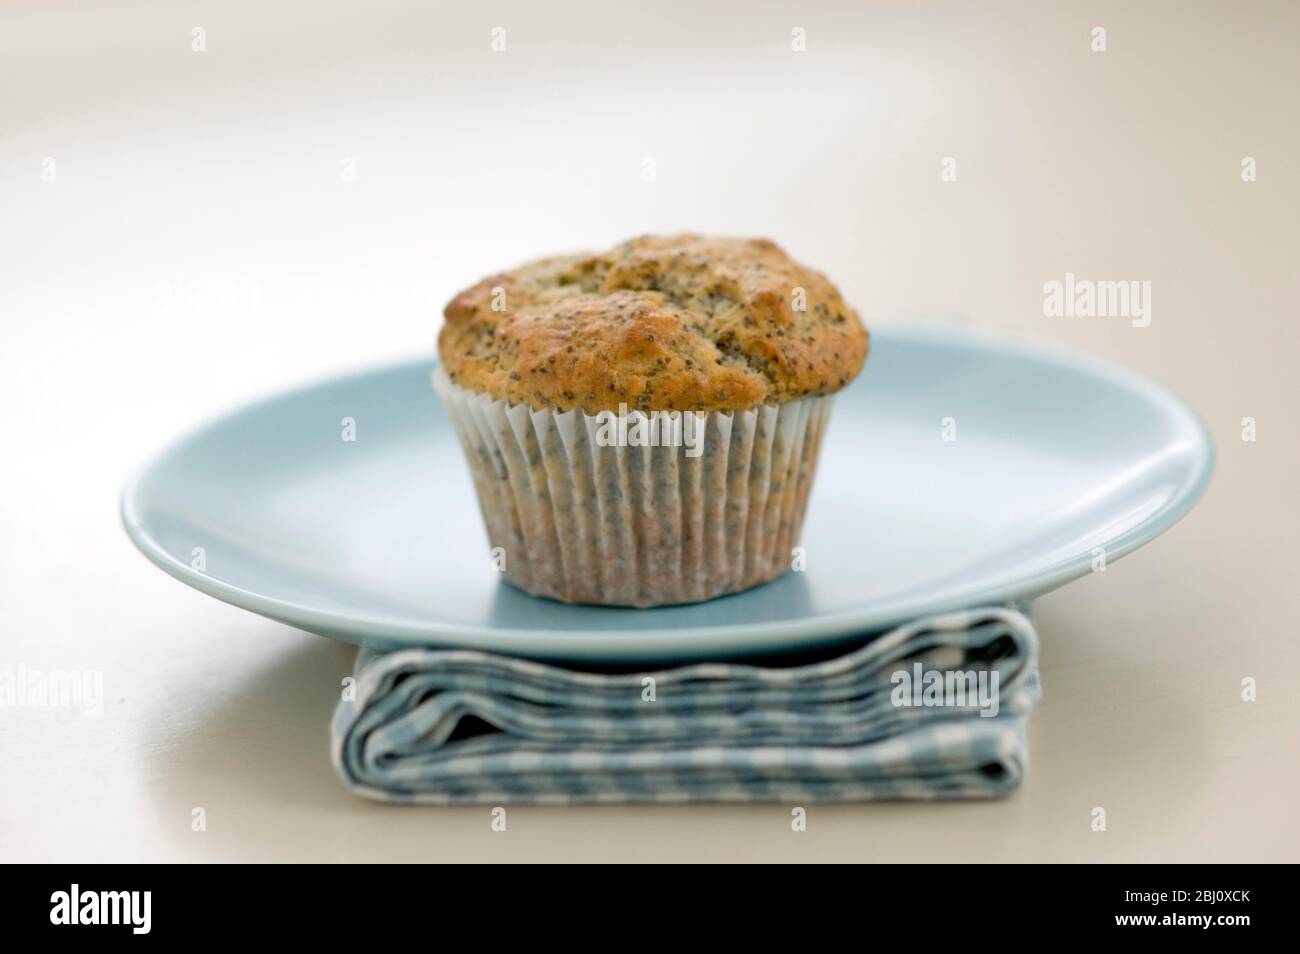 Single poppyseed muffin on blue plate on check napkin, on painted table. - Stock Photo